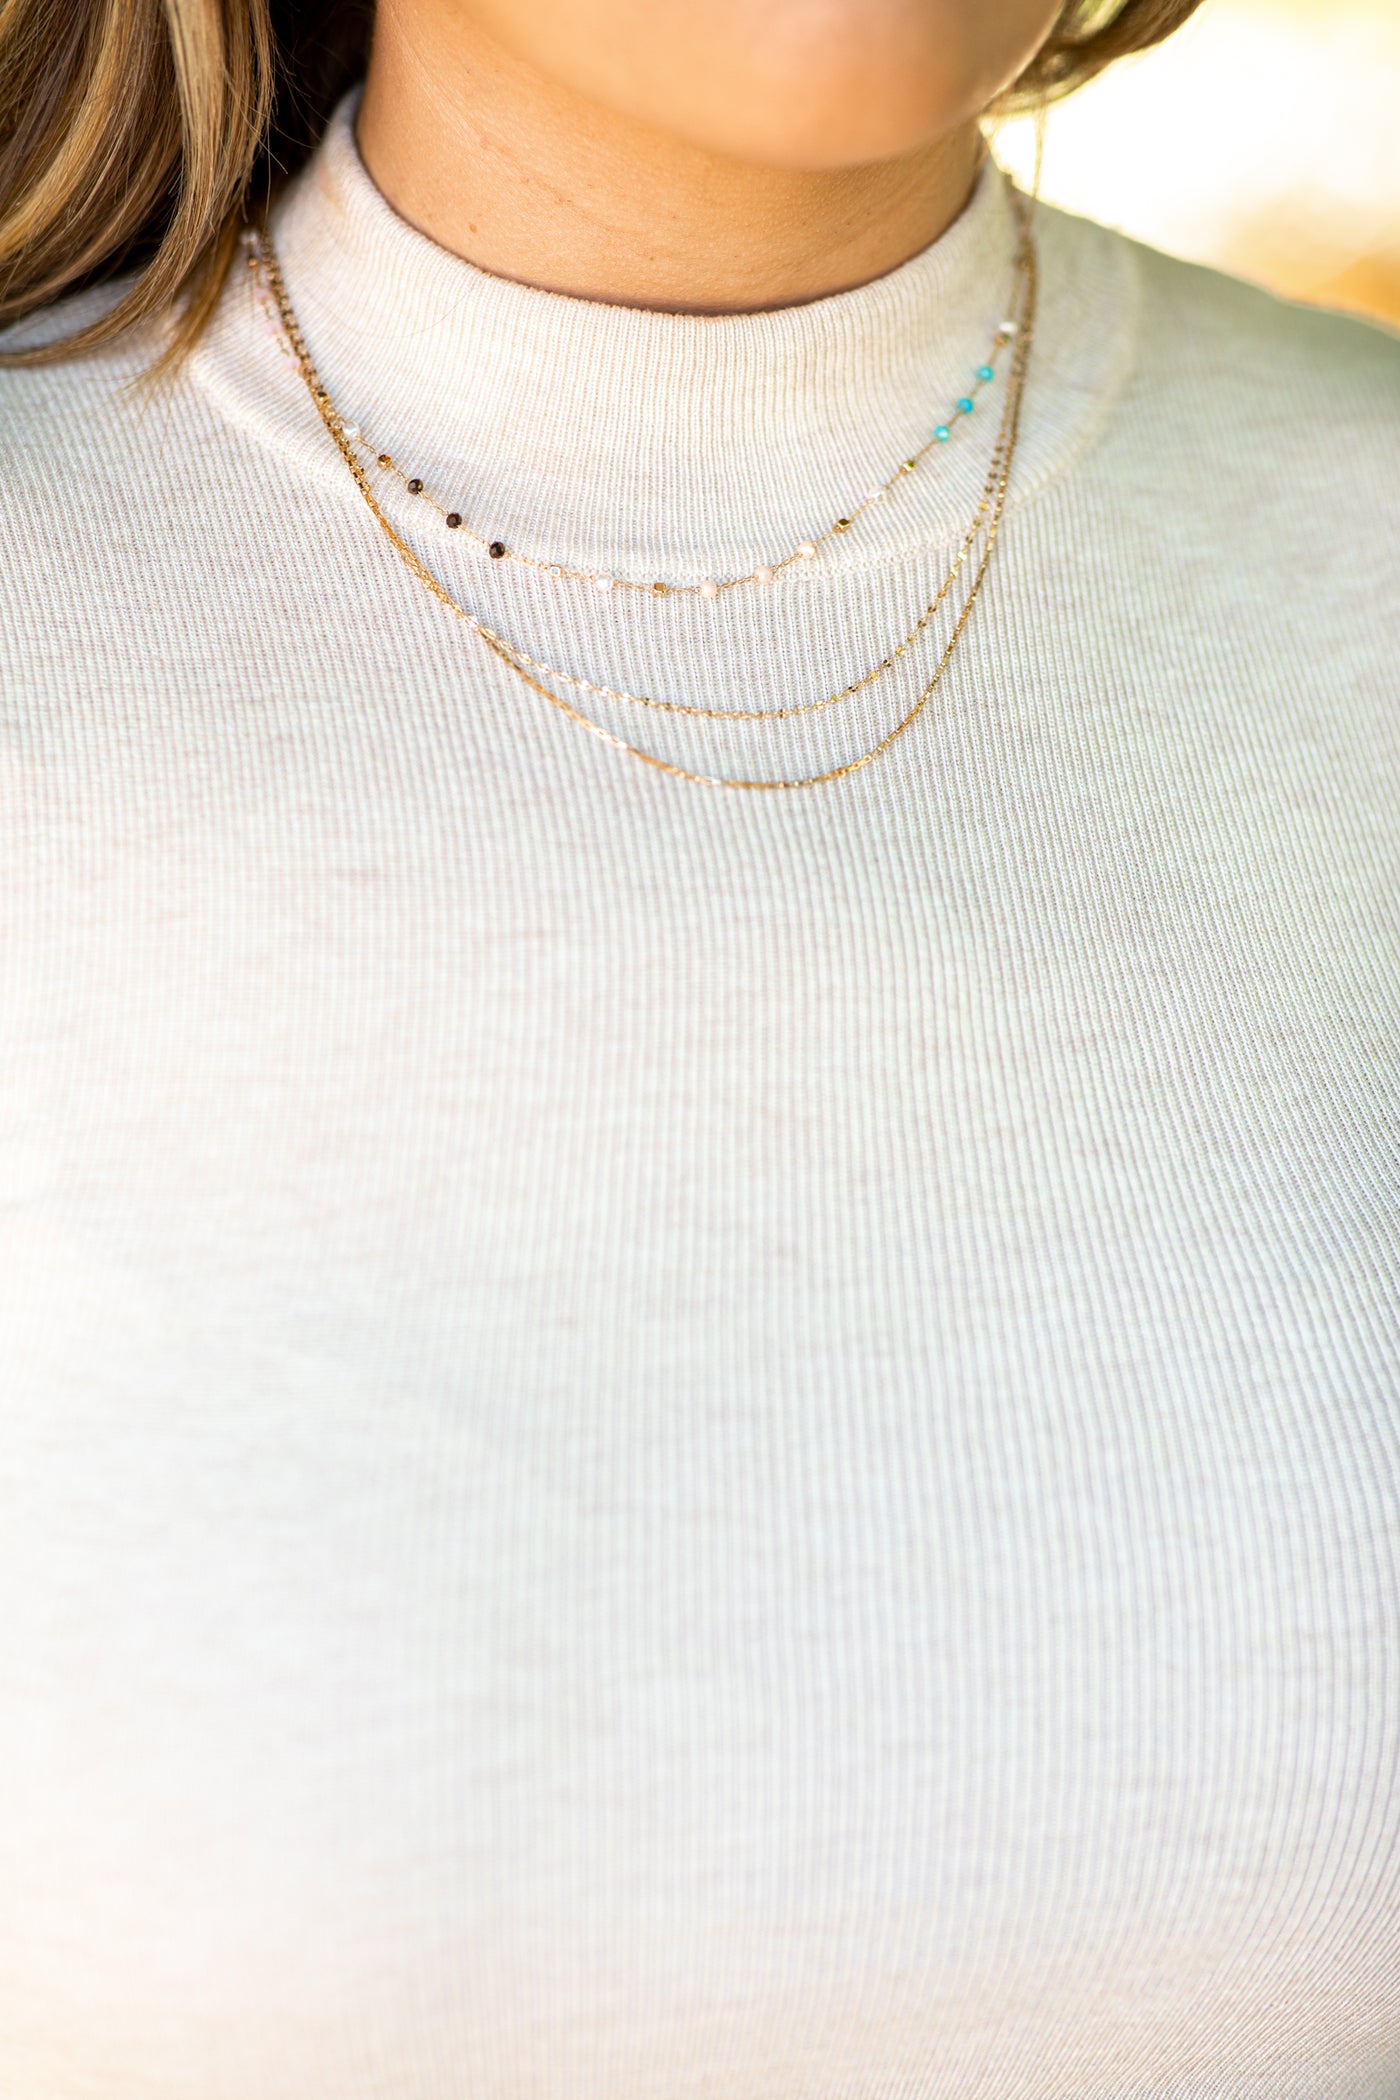 Gold and Multi Dainty Layered Necklace